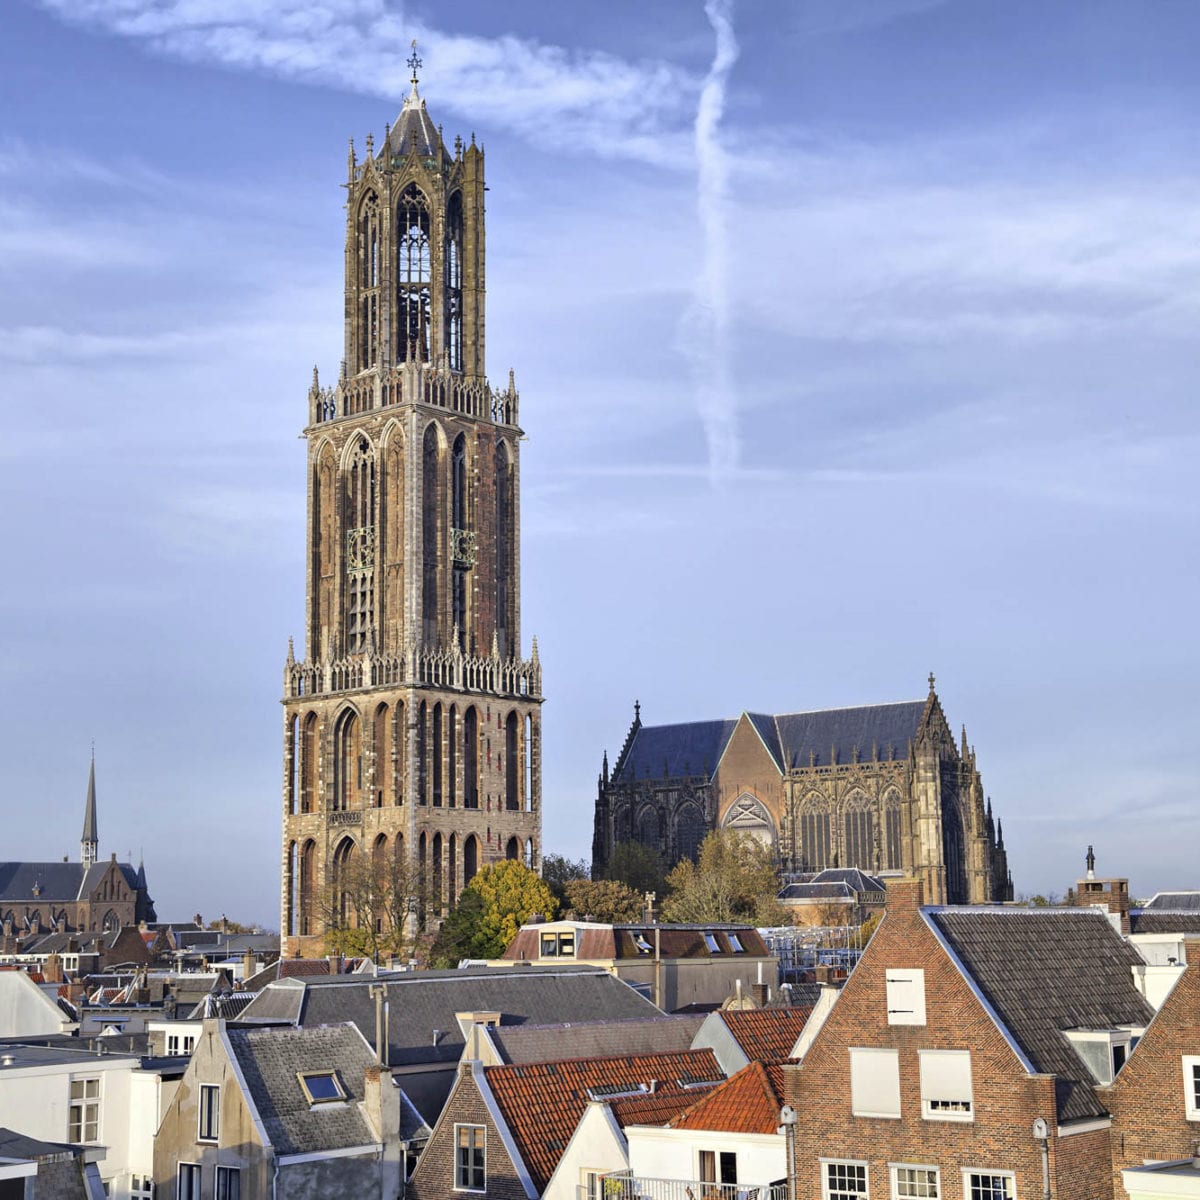 Dom Tower of St Martin's Cathedral in Utrecht